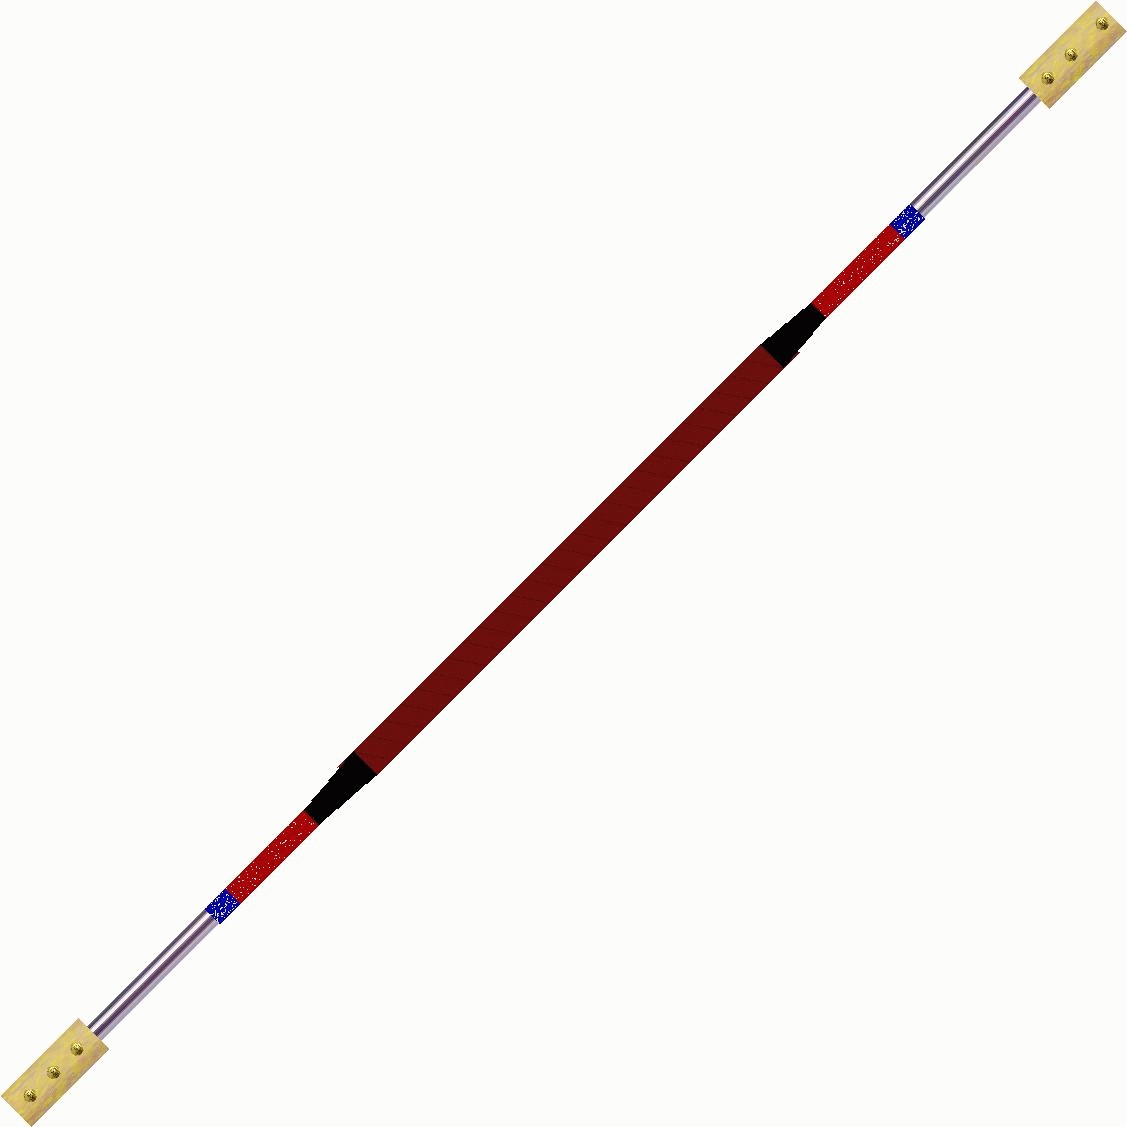 Contact Fire Staff  140cm  100mm    55cm Red  Blue  